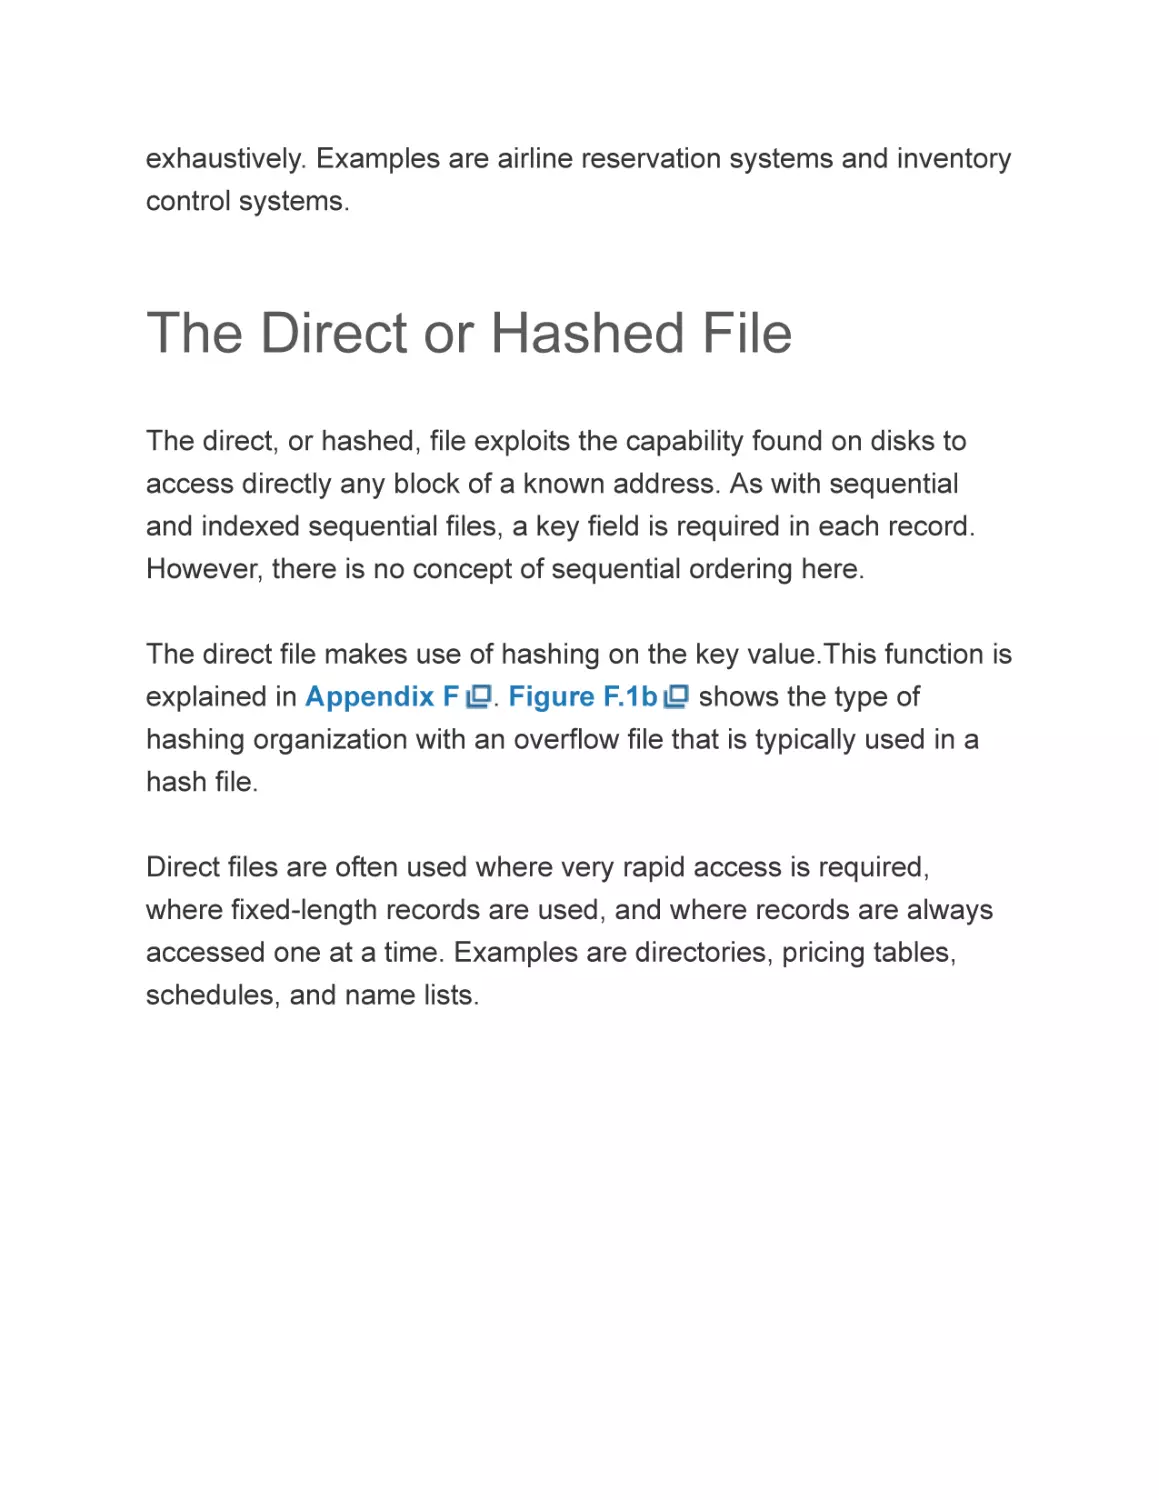 The Direct or Hashed File